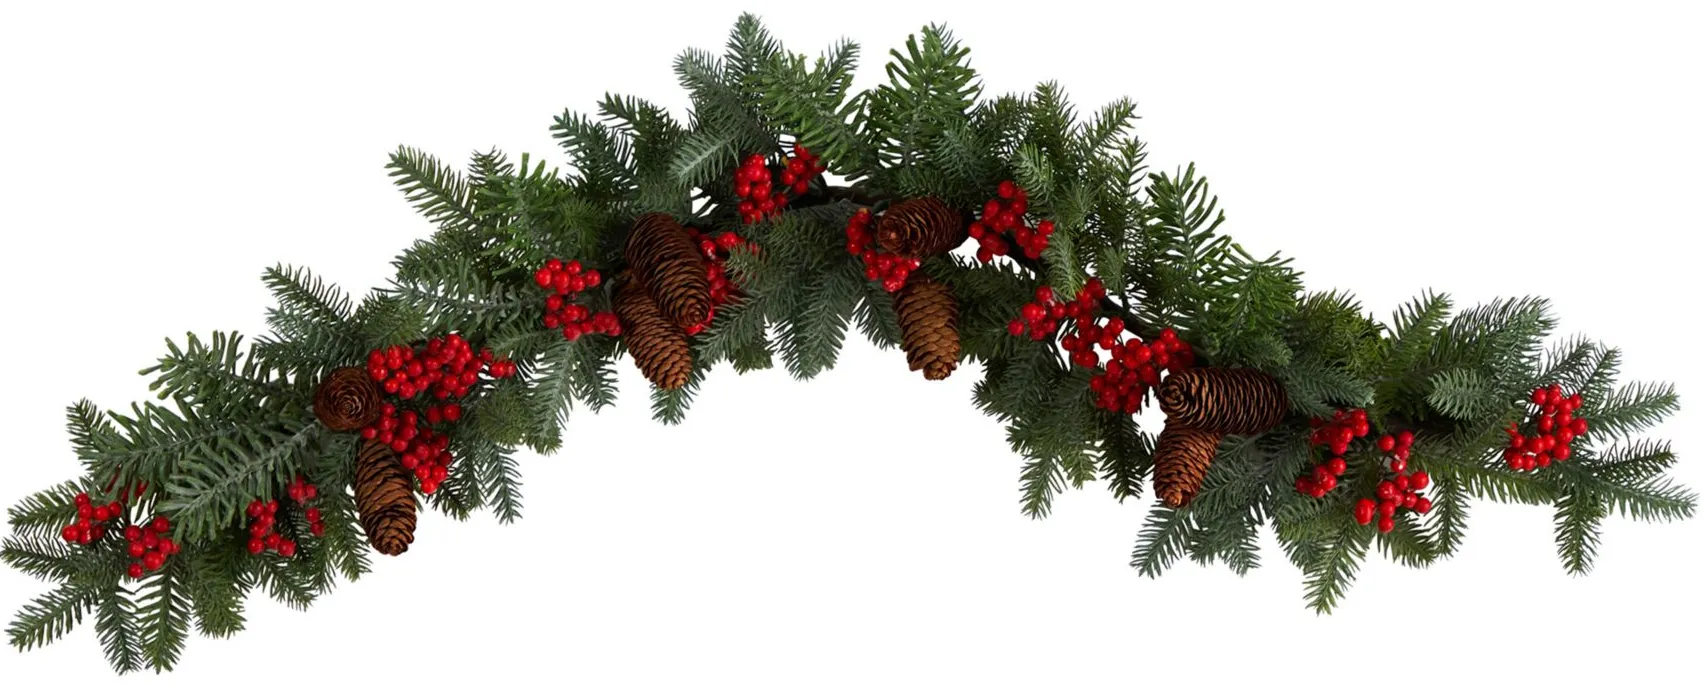 Adak 40" Pine Christmas Garland with Berries in Green by Bellanest